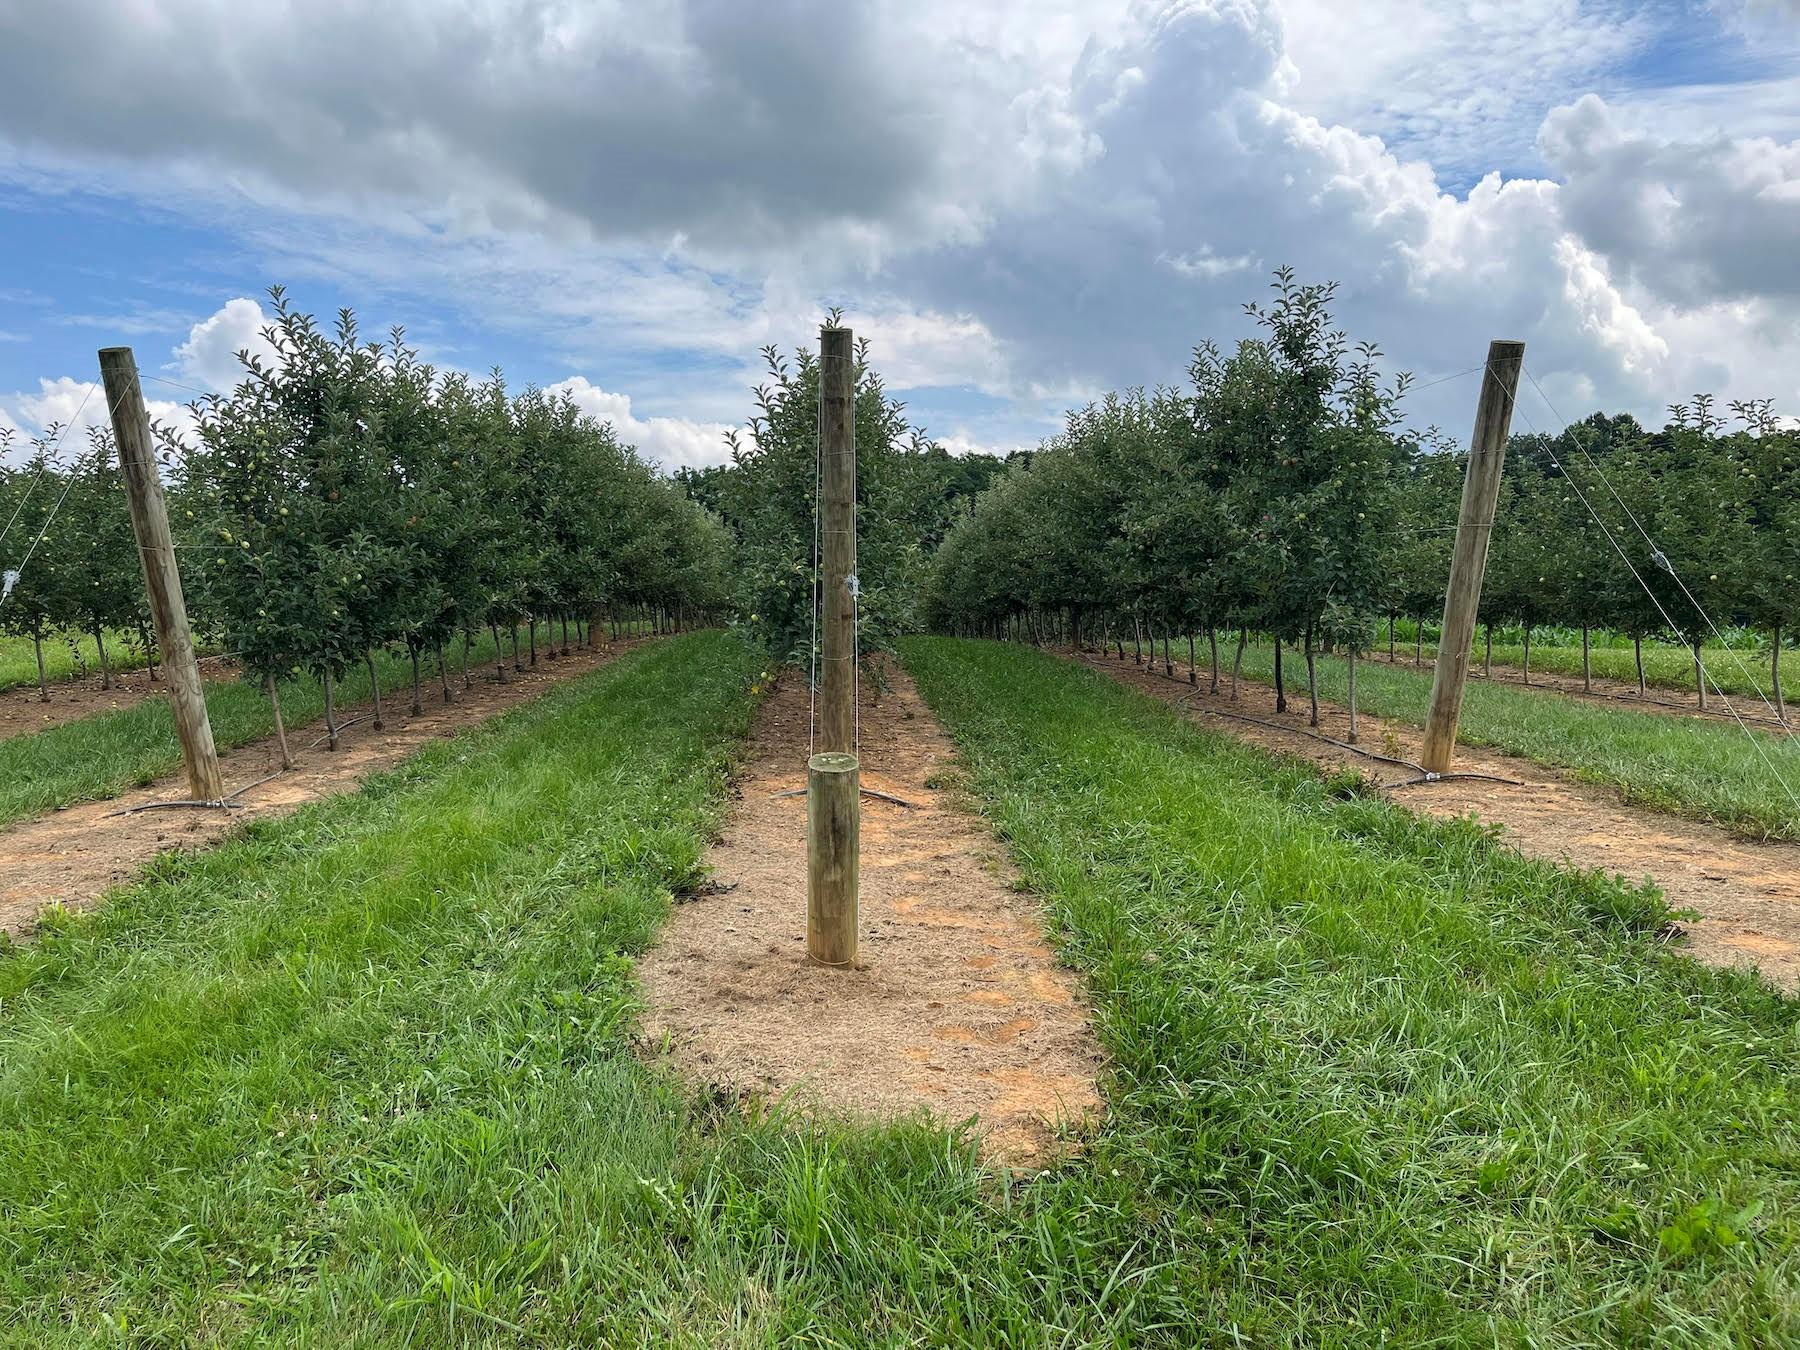 Figure 1. Buckeye Gala rootstock trial orchard established in 2019 as part of the NC-140 multistate project. Photo: Dr. Macarena Farcuh, University of Maryland.